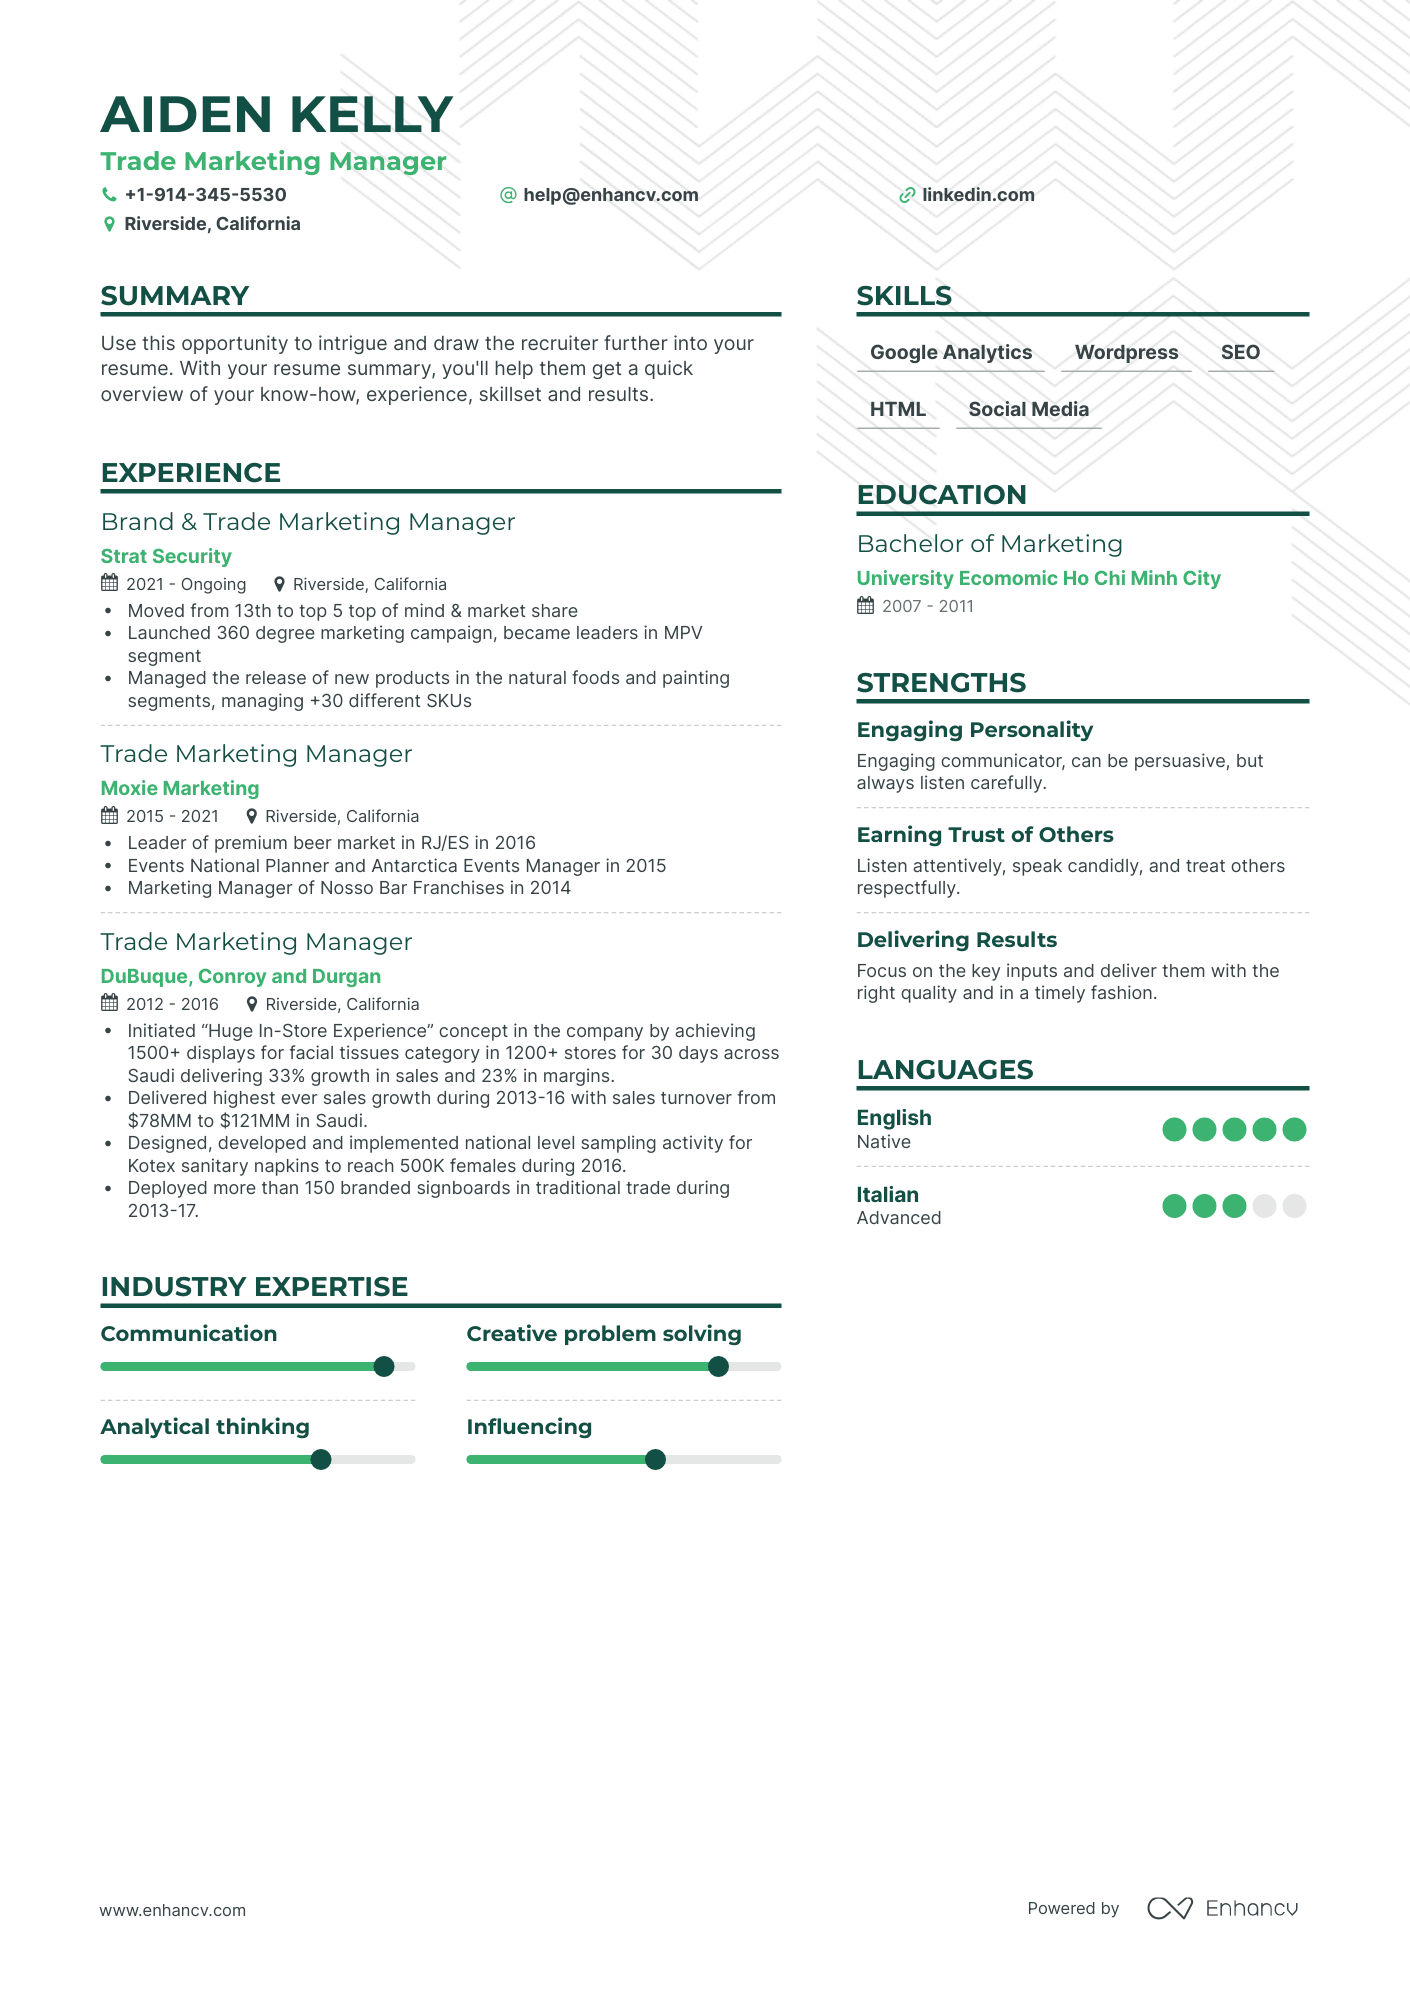 Trade Marketing Manager Resume Examples & Guide for 2023 (Layout ...